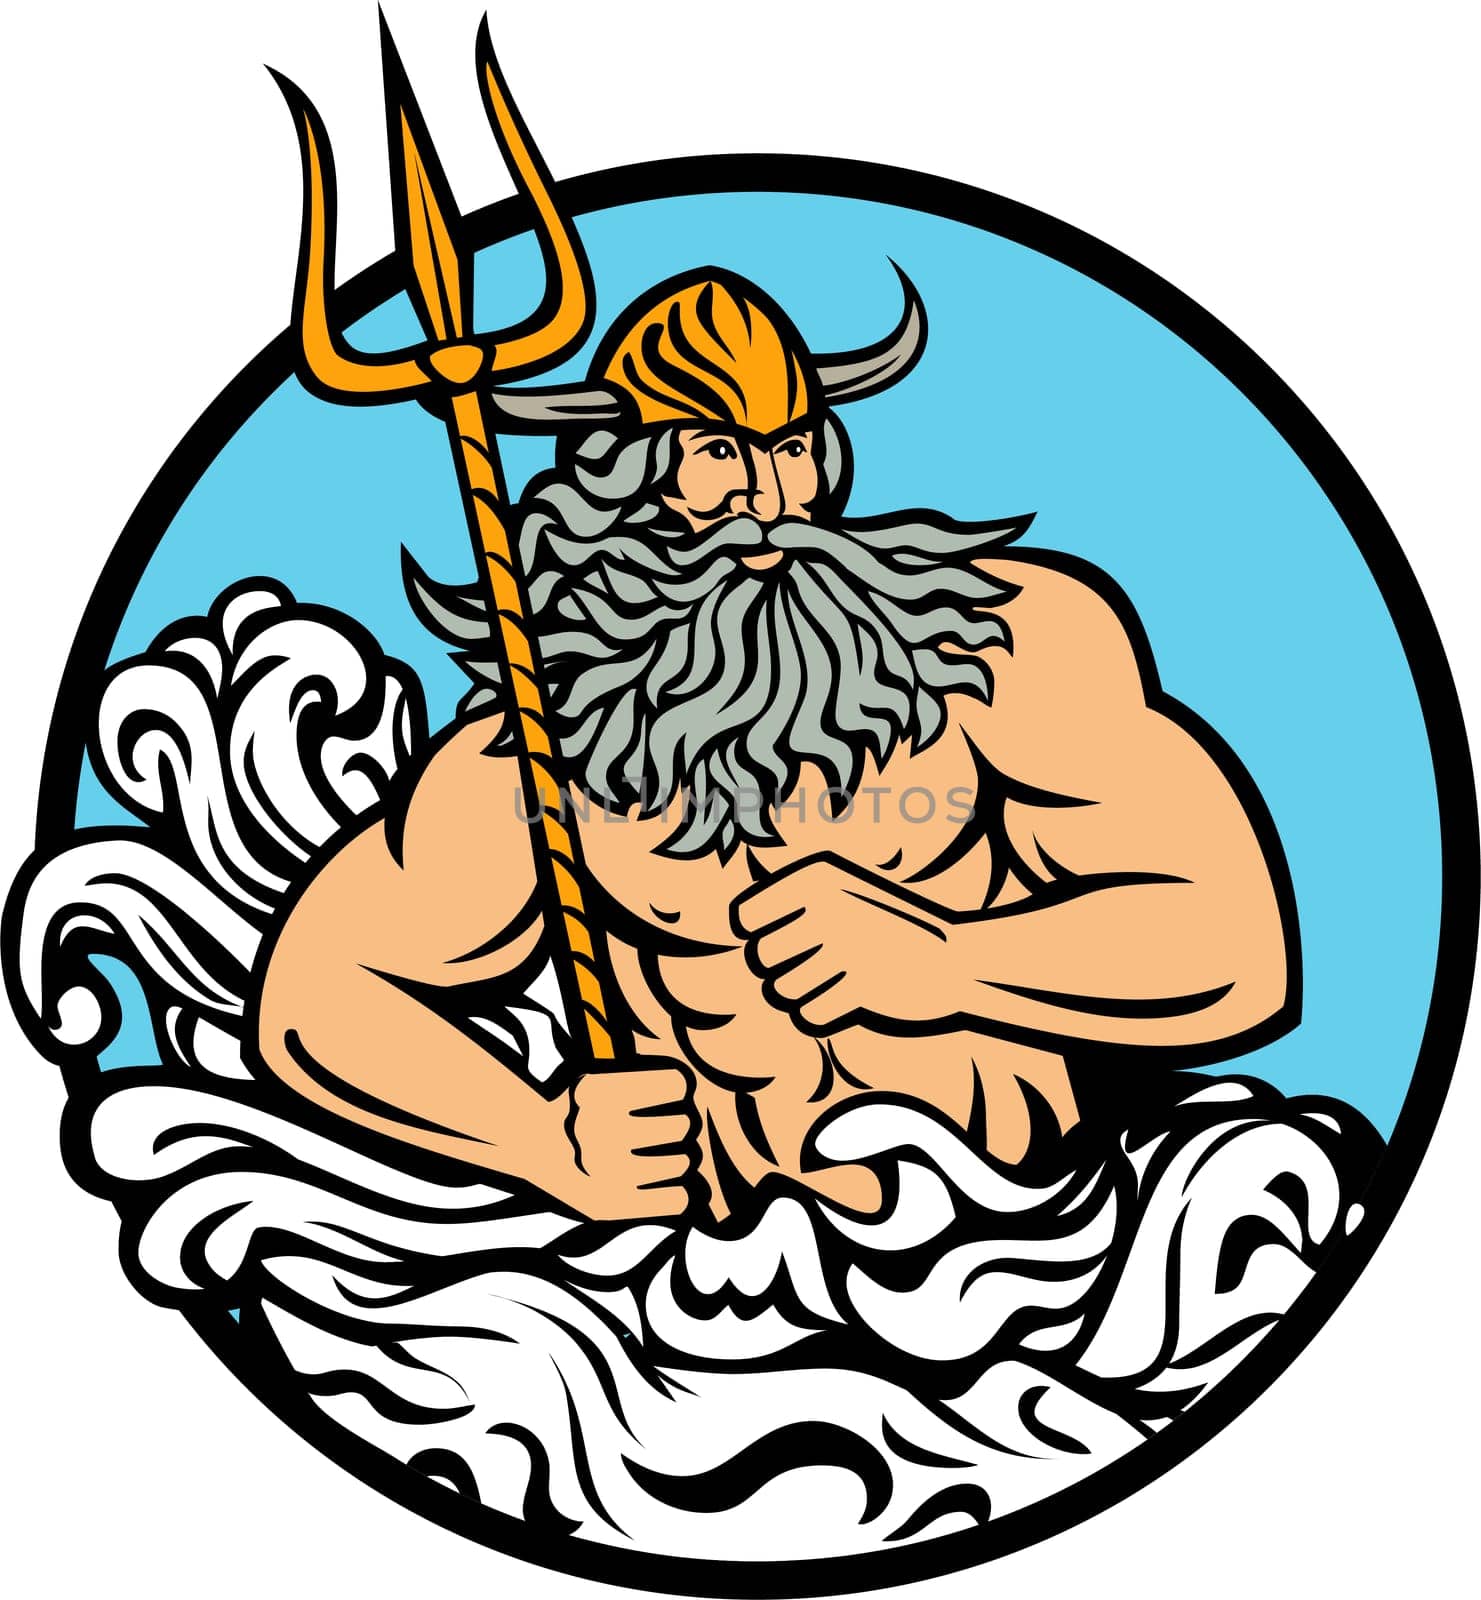 Mascot illustration of Aegir, Hler or Gymir God of the sea in Norse mythology with trident and waves splashing viewed from front set inside circle on isolated background in retro style.